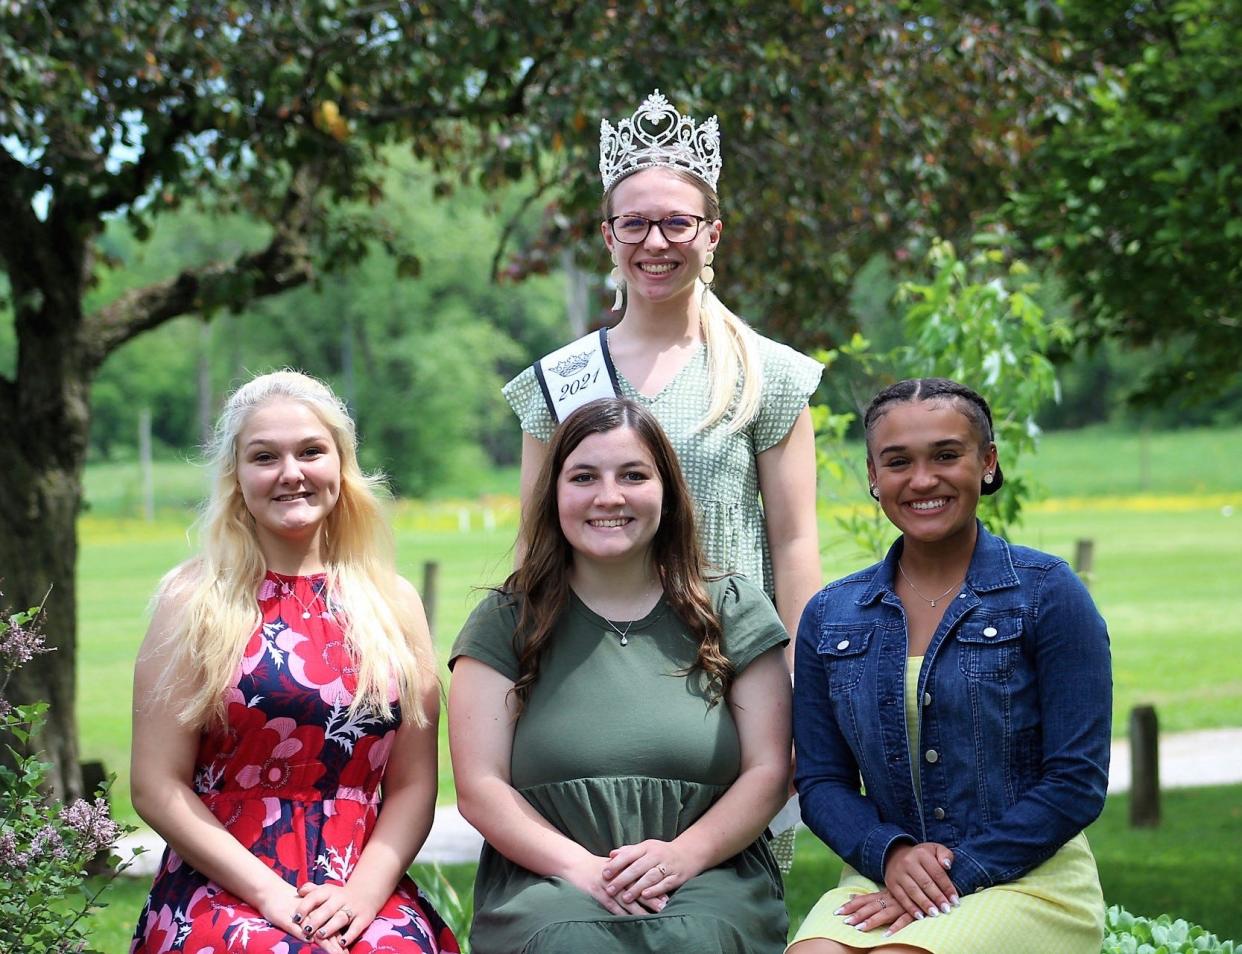 Your 2022 Owen County Fair Queen contestants are, front row, from left: Abigail Miller, Hannah York and Breanna (Bre) Davis. They are accompanied by 2021 Miss Owen County Libby Beeman.